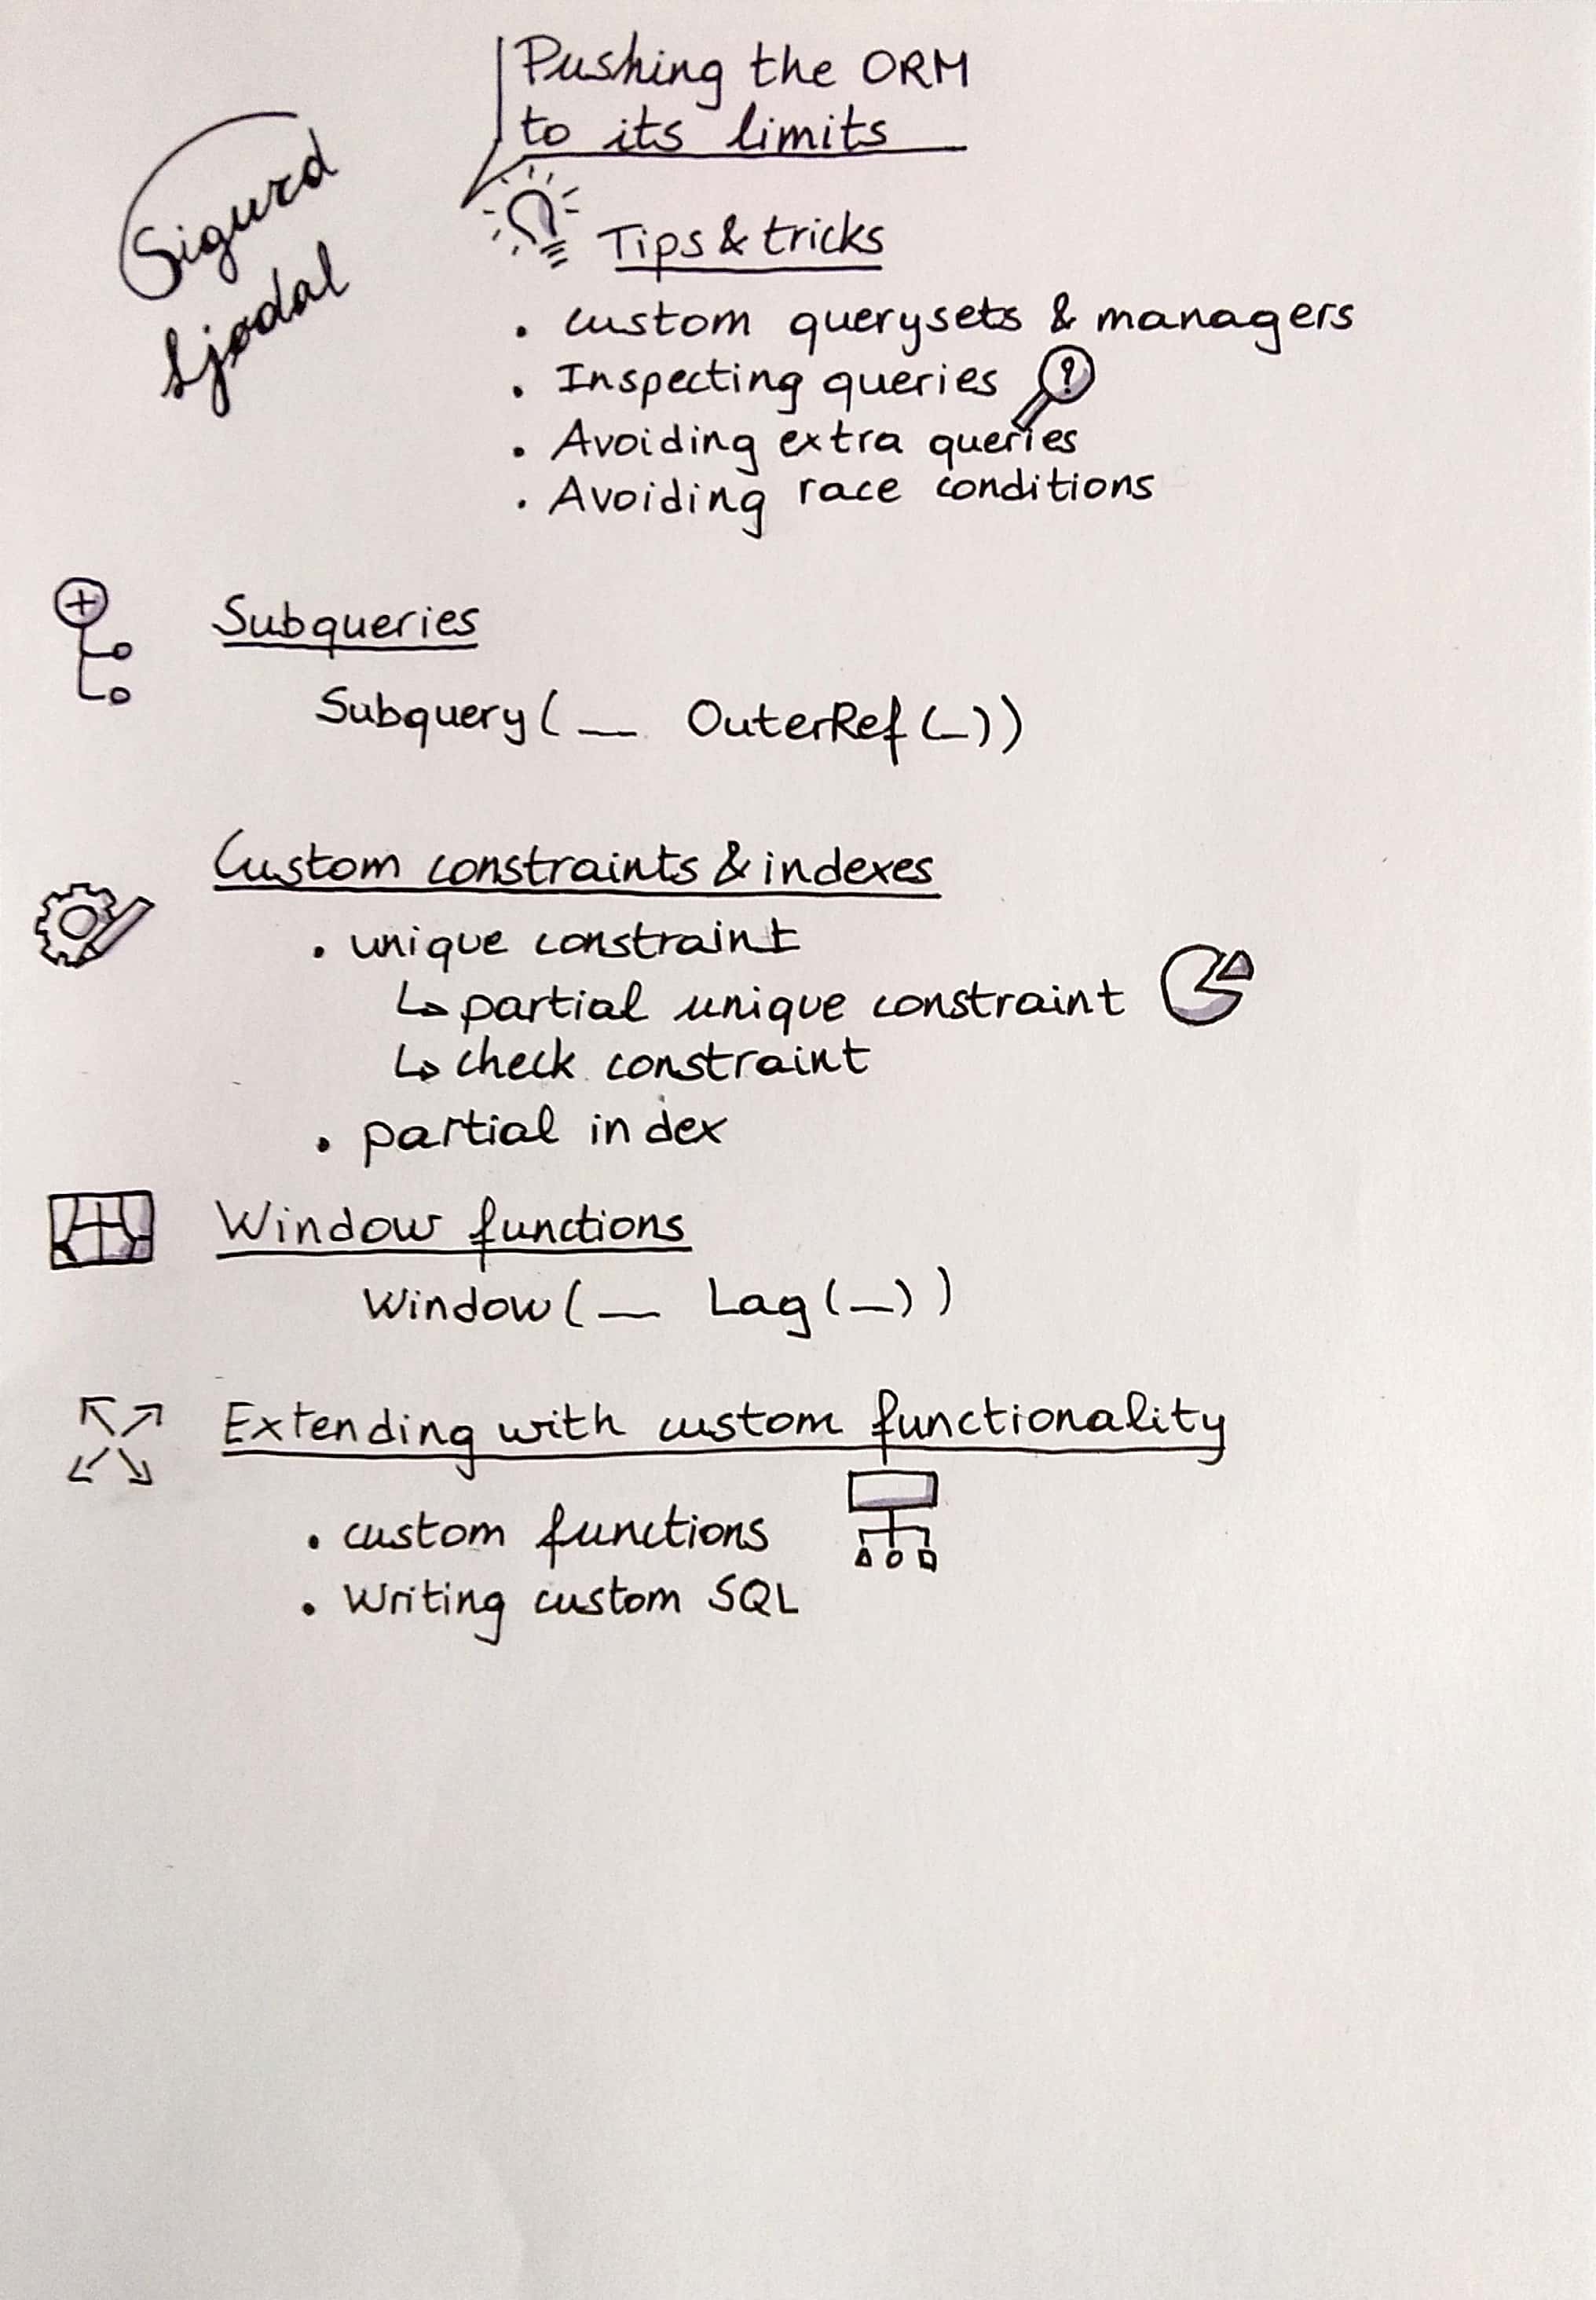 Sketchnote of Pushing the ORM to its limits